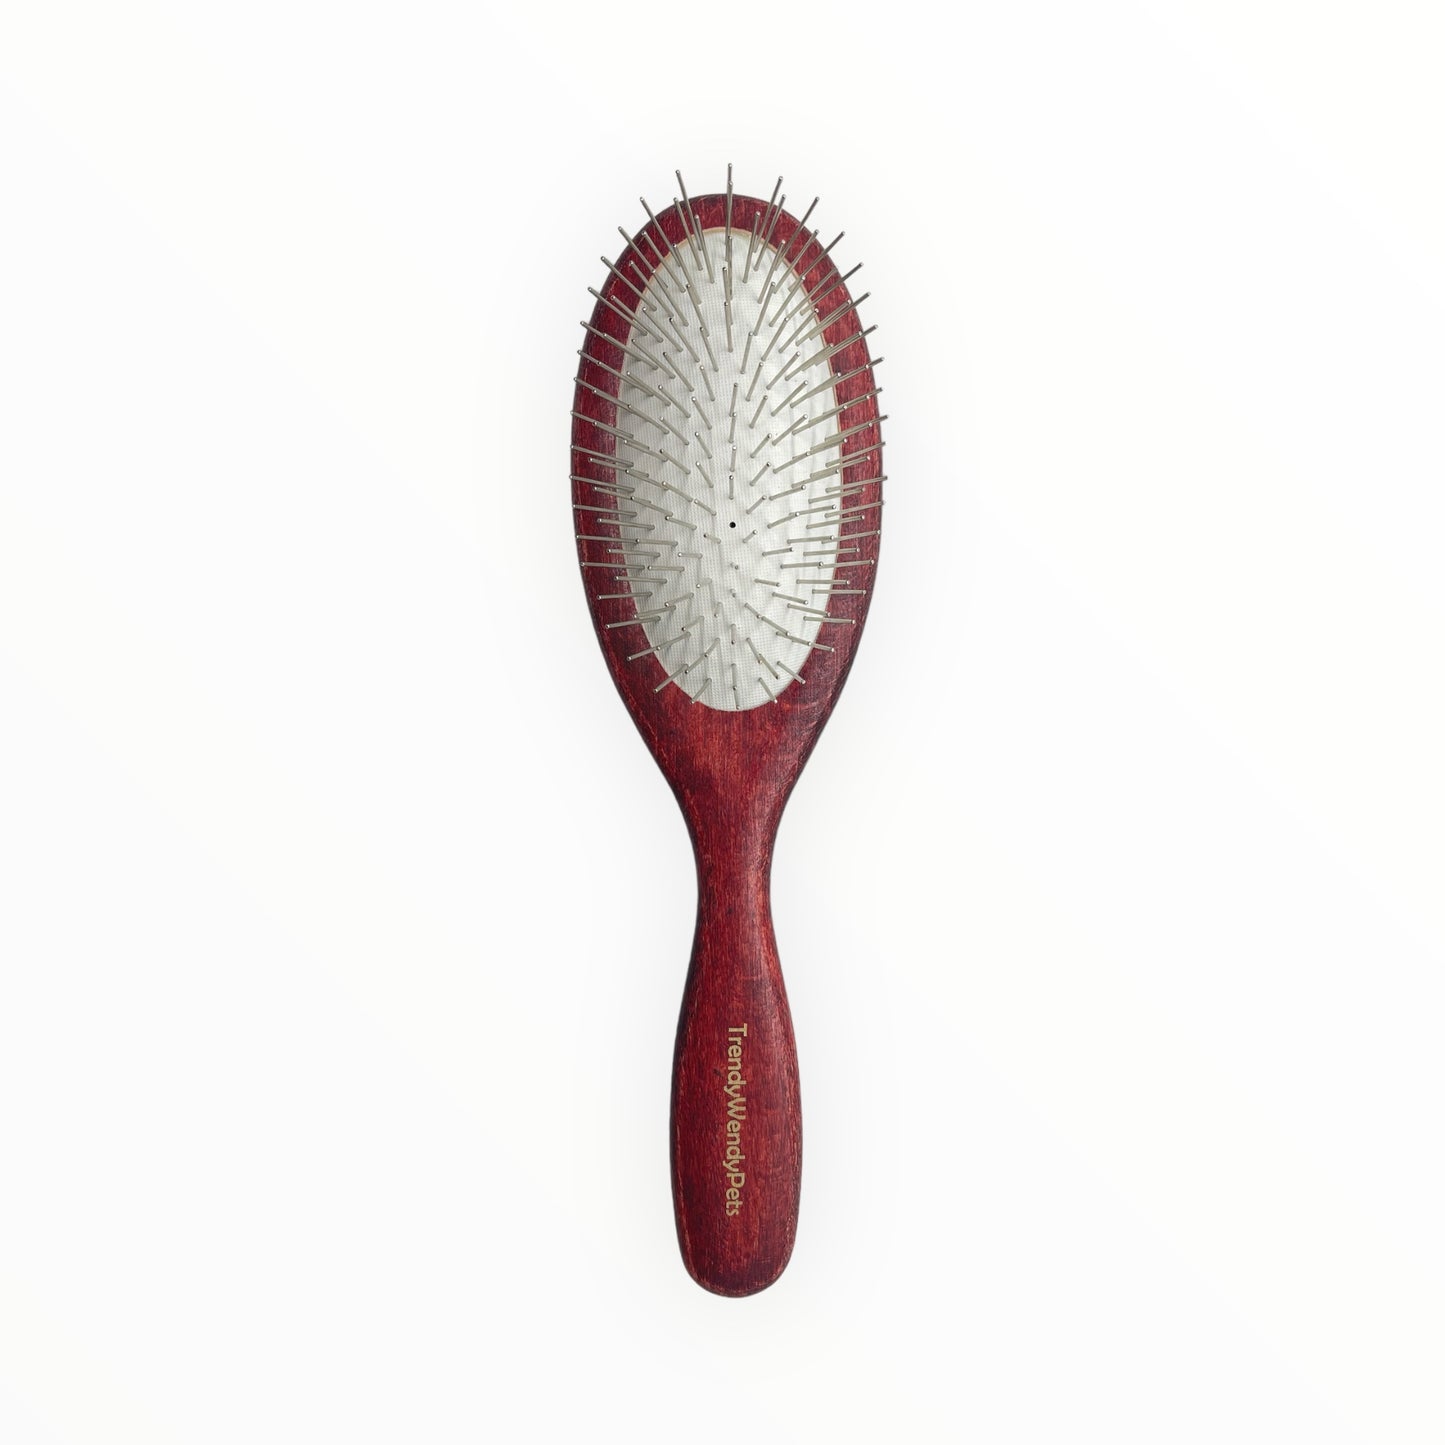 Large and Small Oval Brush with 20mm pins